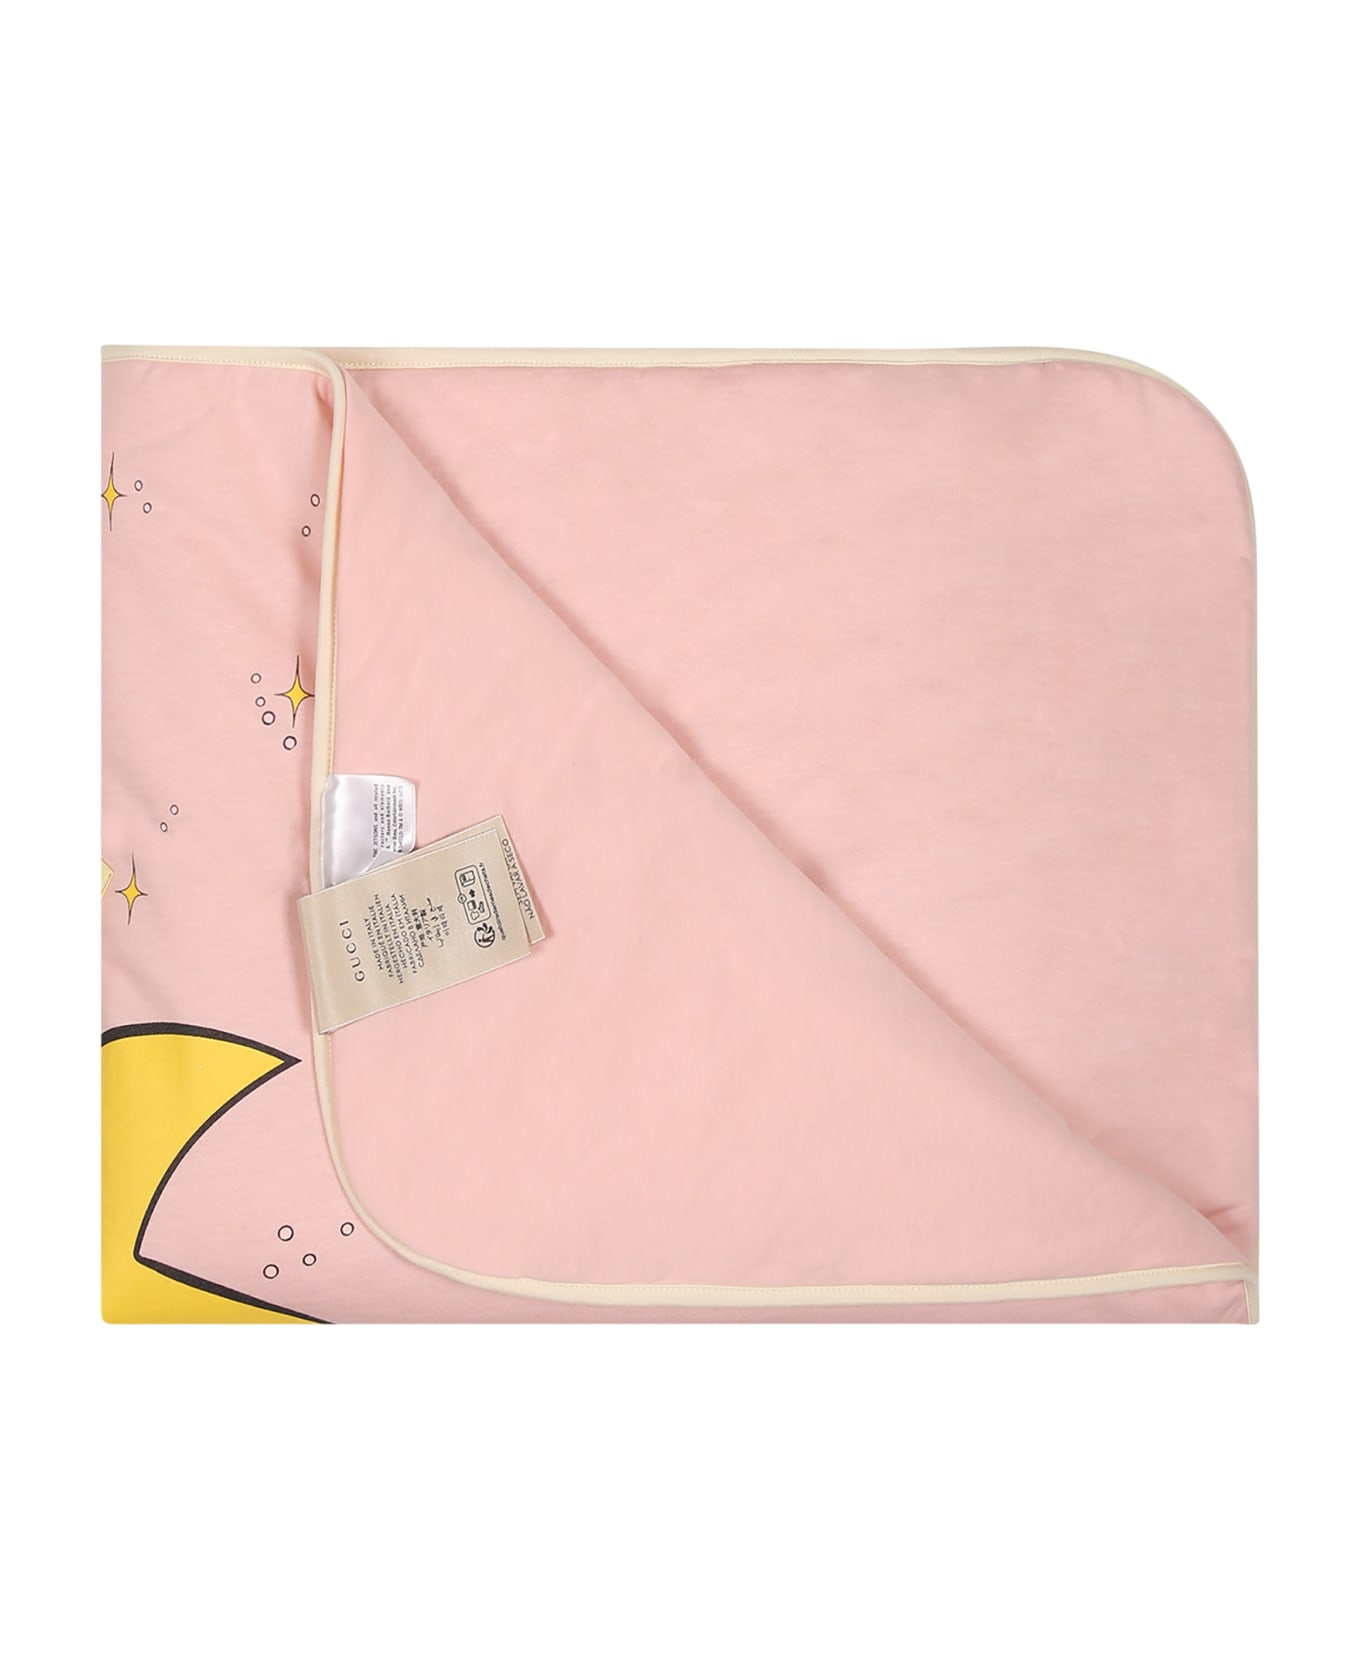 Gucci Pink Blanket For Baby Girl With Logo And Great-grandchildren Print - Pink アクセサリー＆ギフト